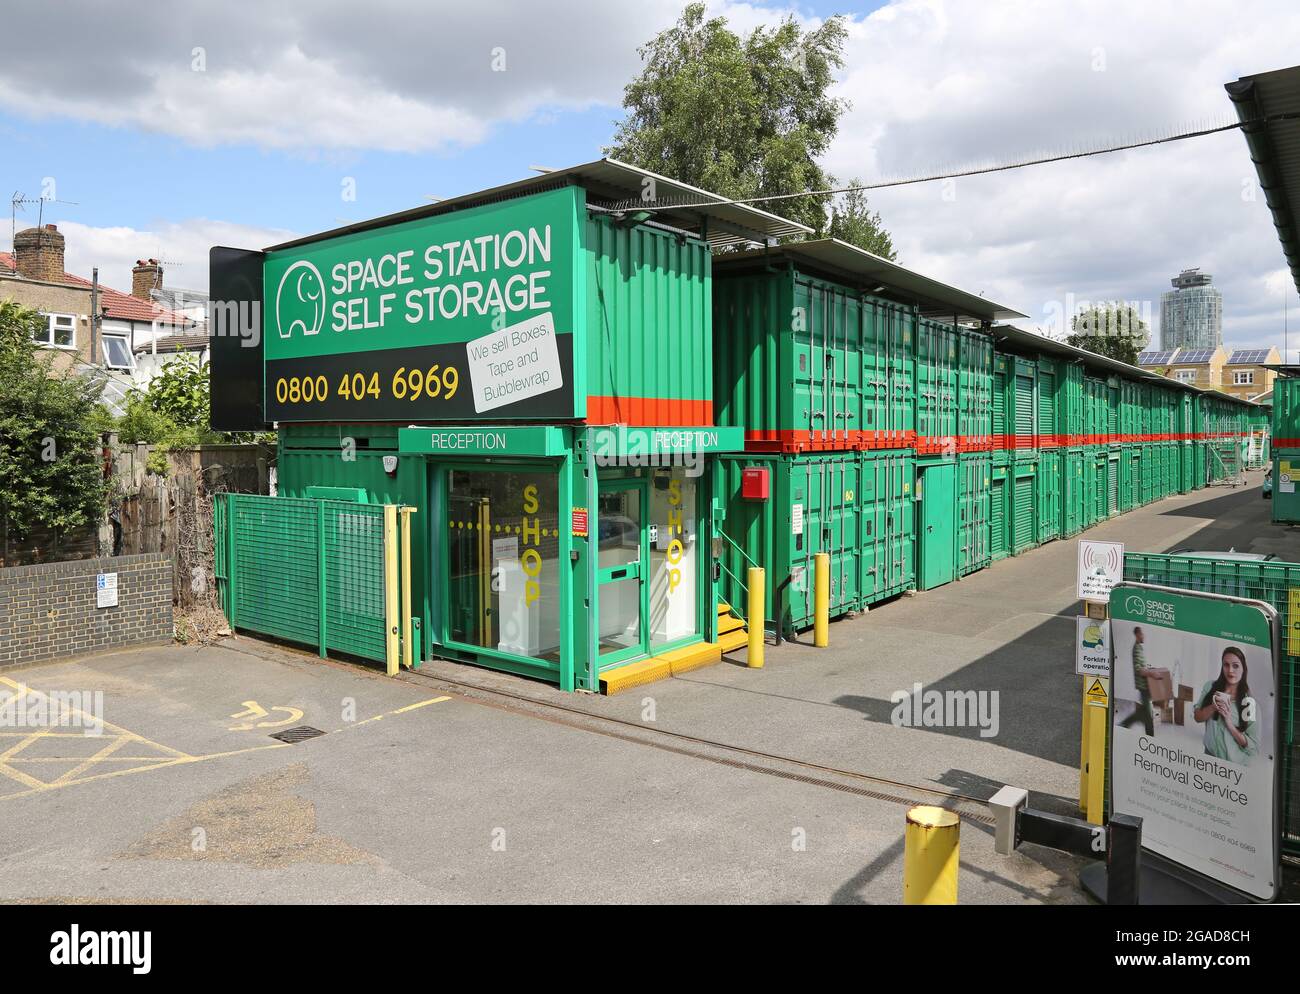 Space Station self storage depot at Brentford, London, UK. Uses shipping containers to provide secure storage. Stock Photo